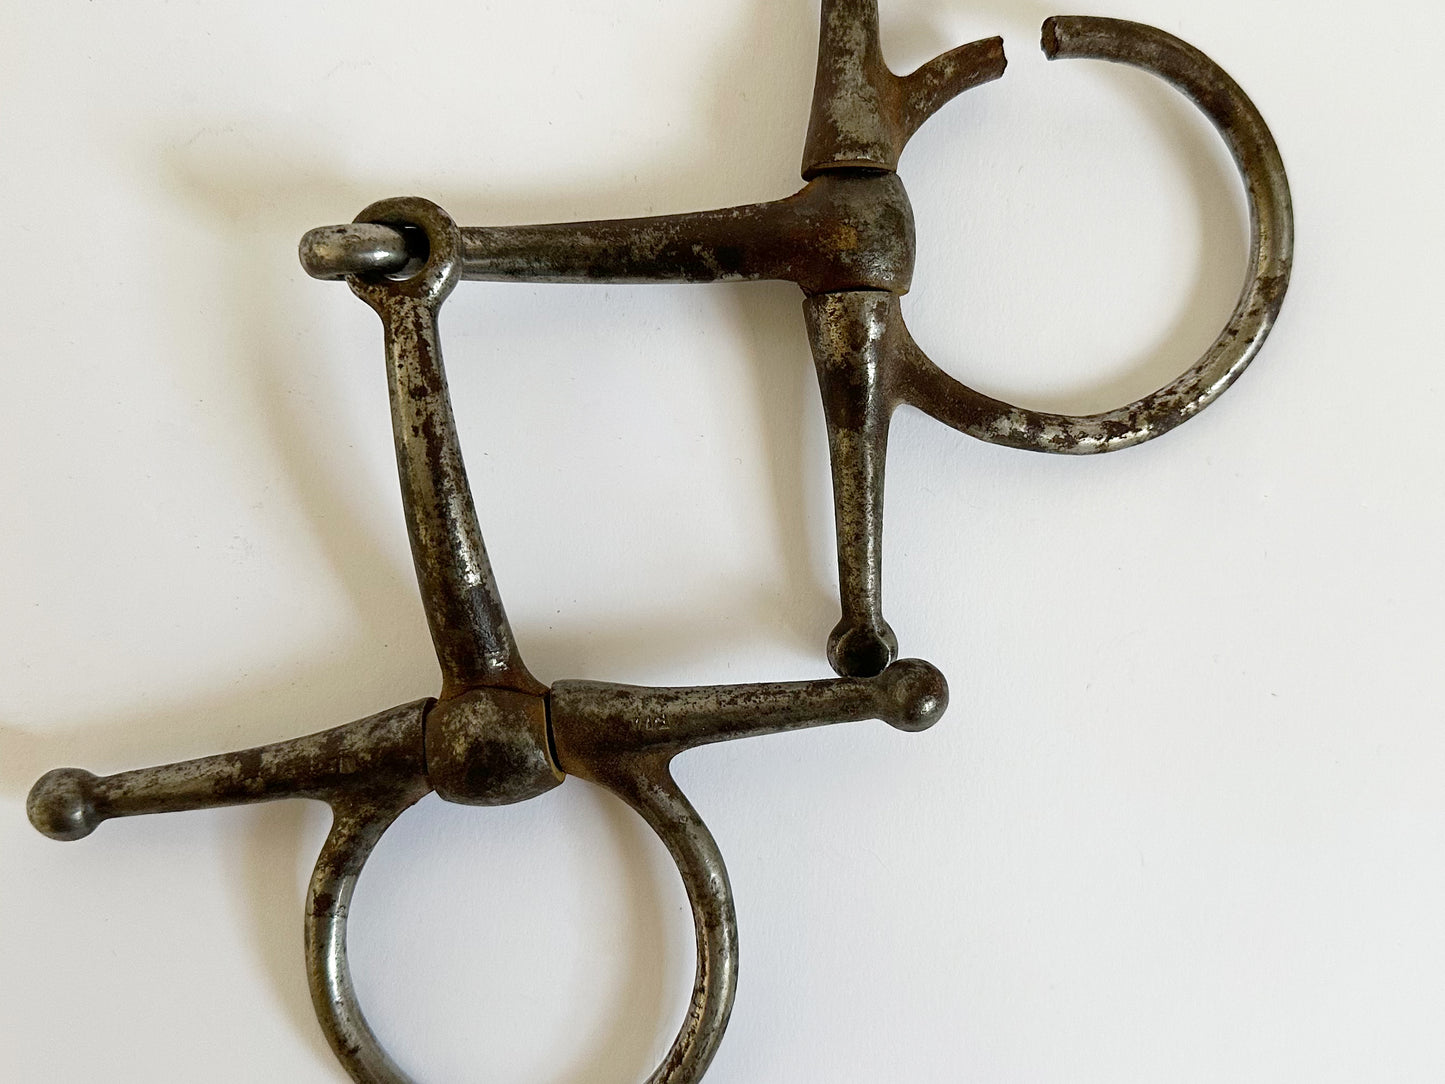 Antique Horse Snaffle Bit, 1910 US Cavalry Collectable